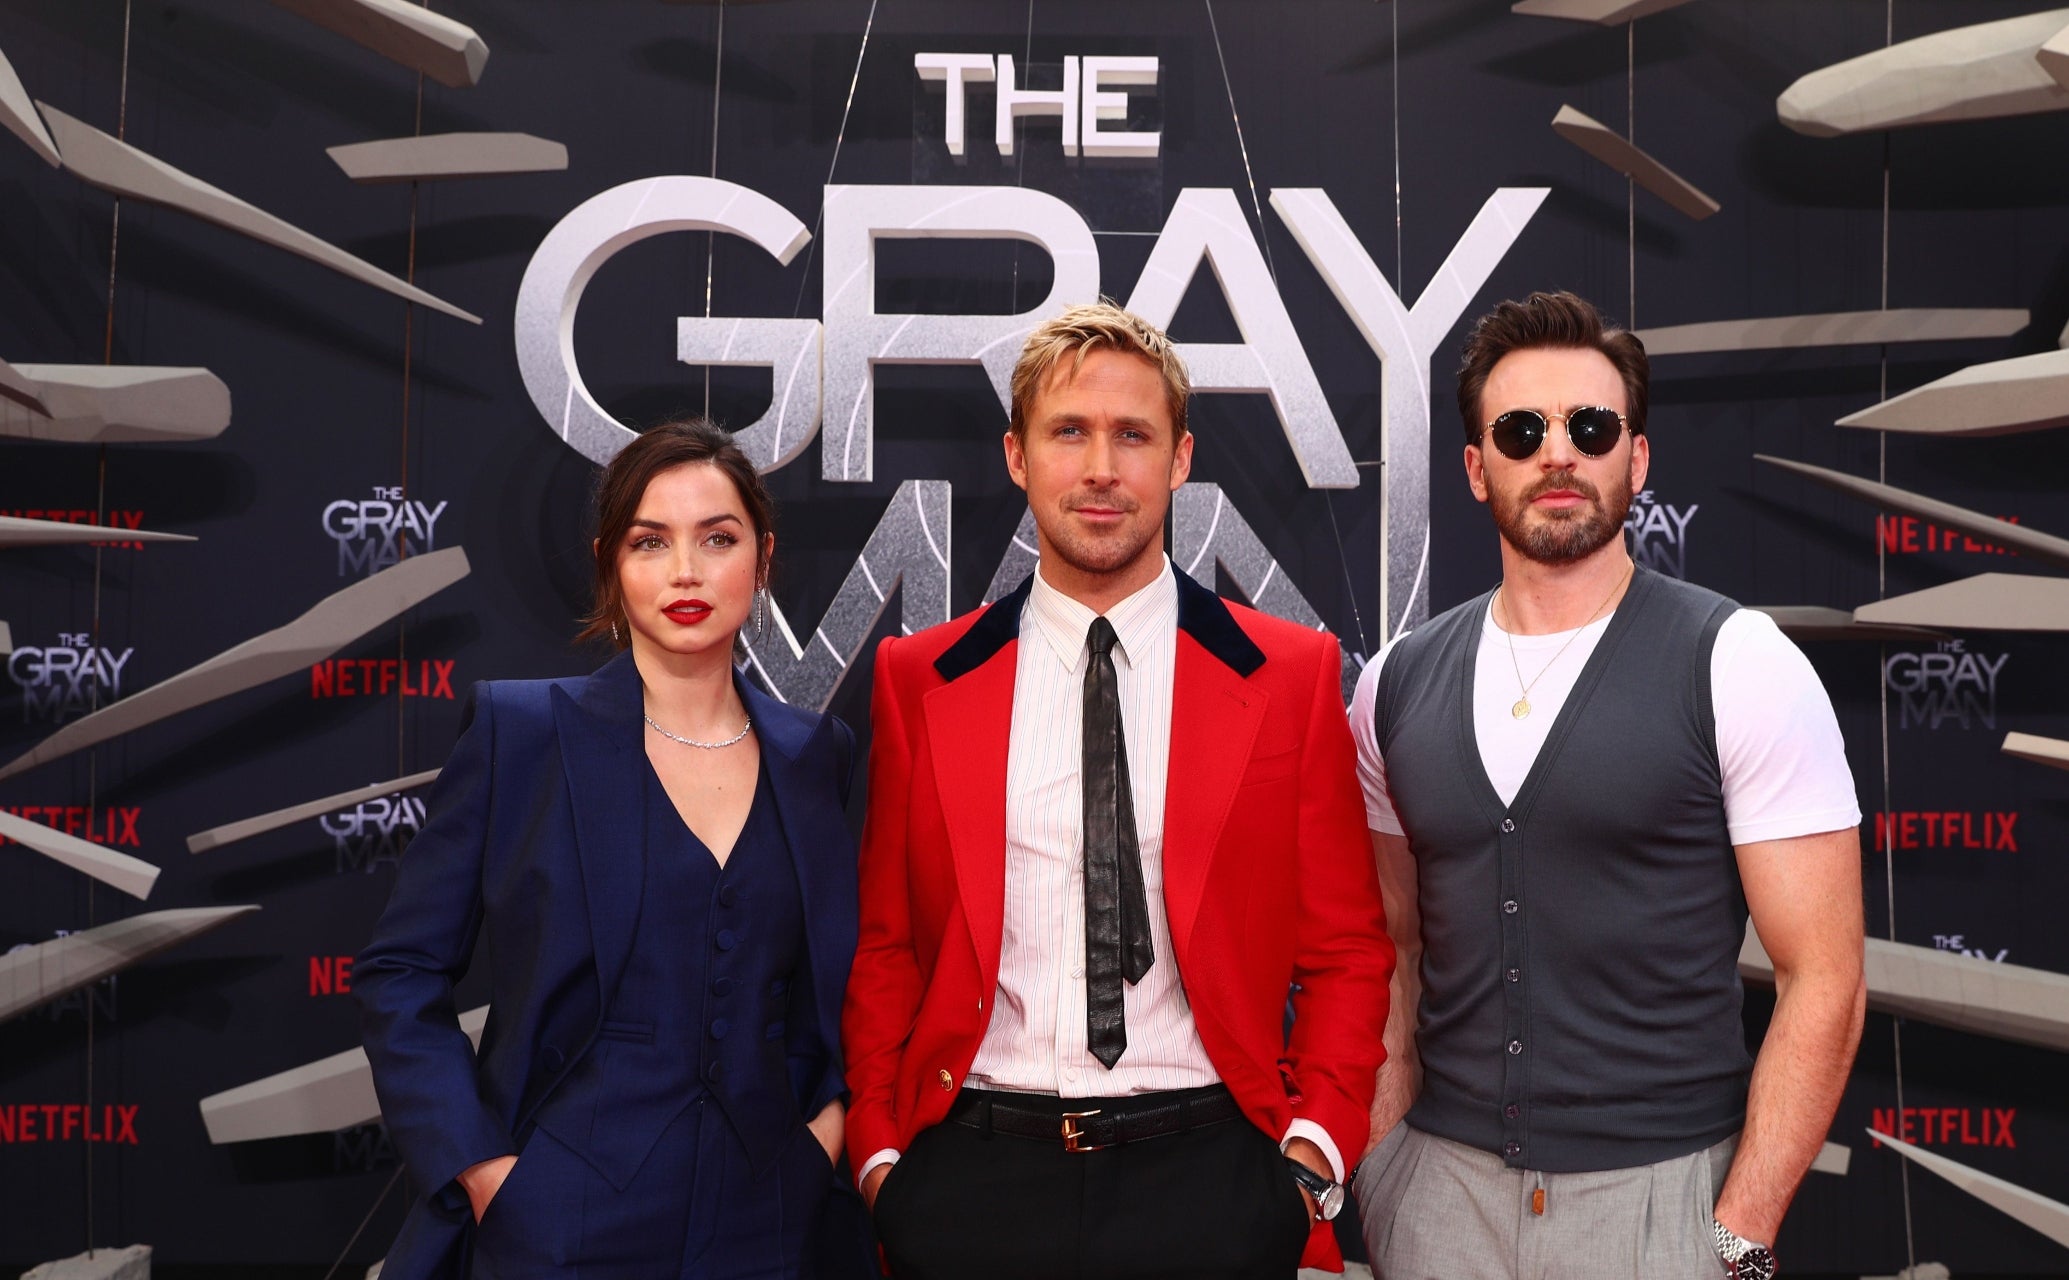 Ryan Gosling to Star in Netflix's 'The Gray Man' Sequel, Russo Brothers Say  'Edgy and Experimental' Spinoff Coming